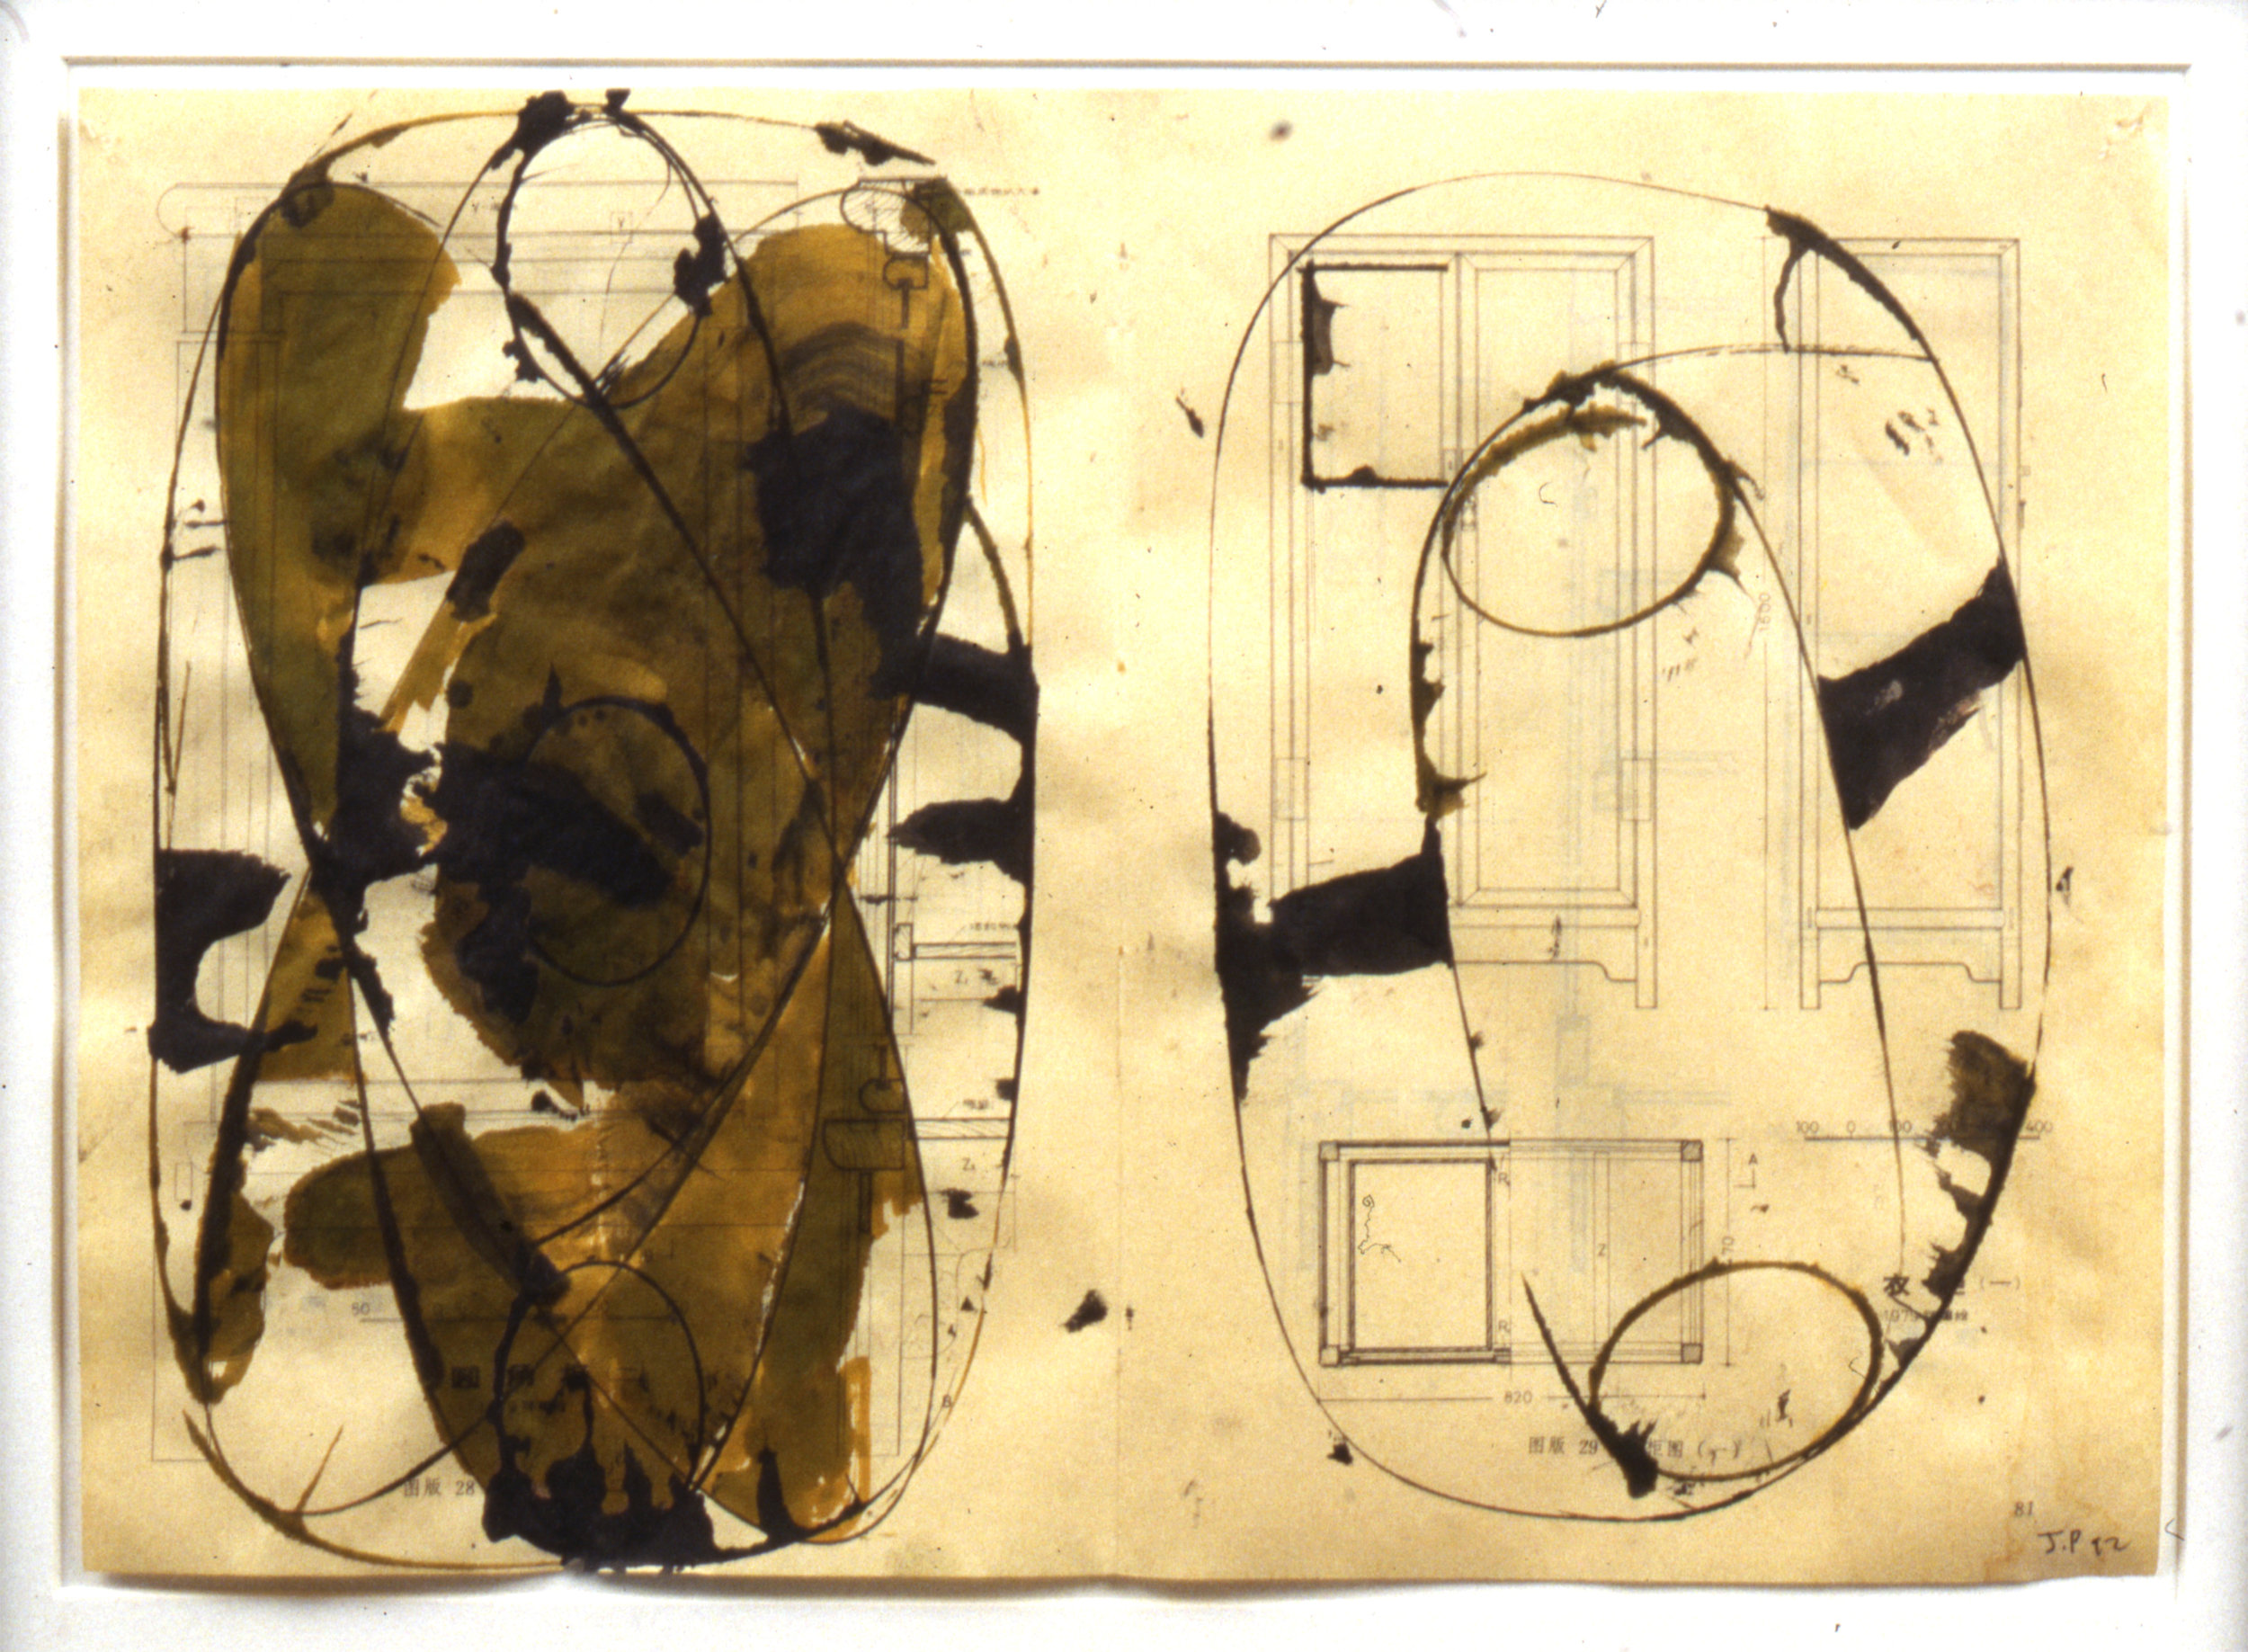 The Bivalves F (6 of 9), 1992